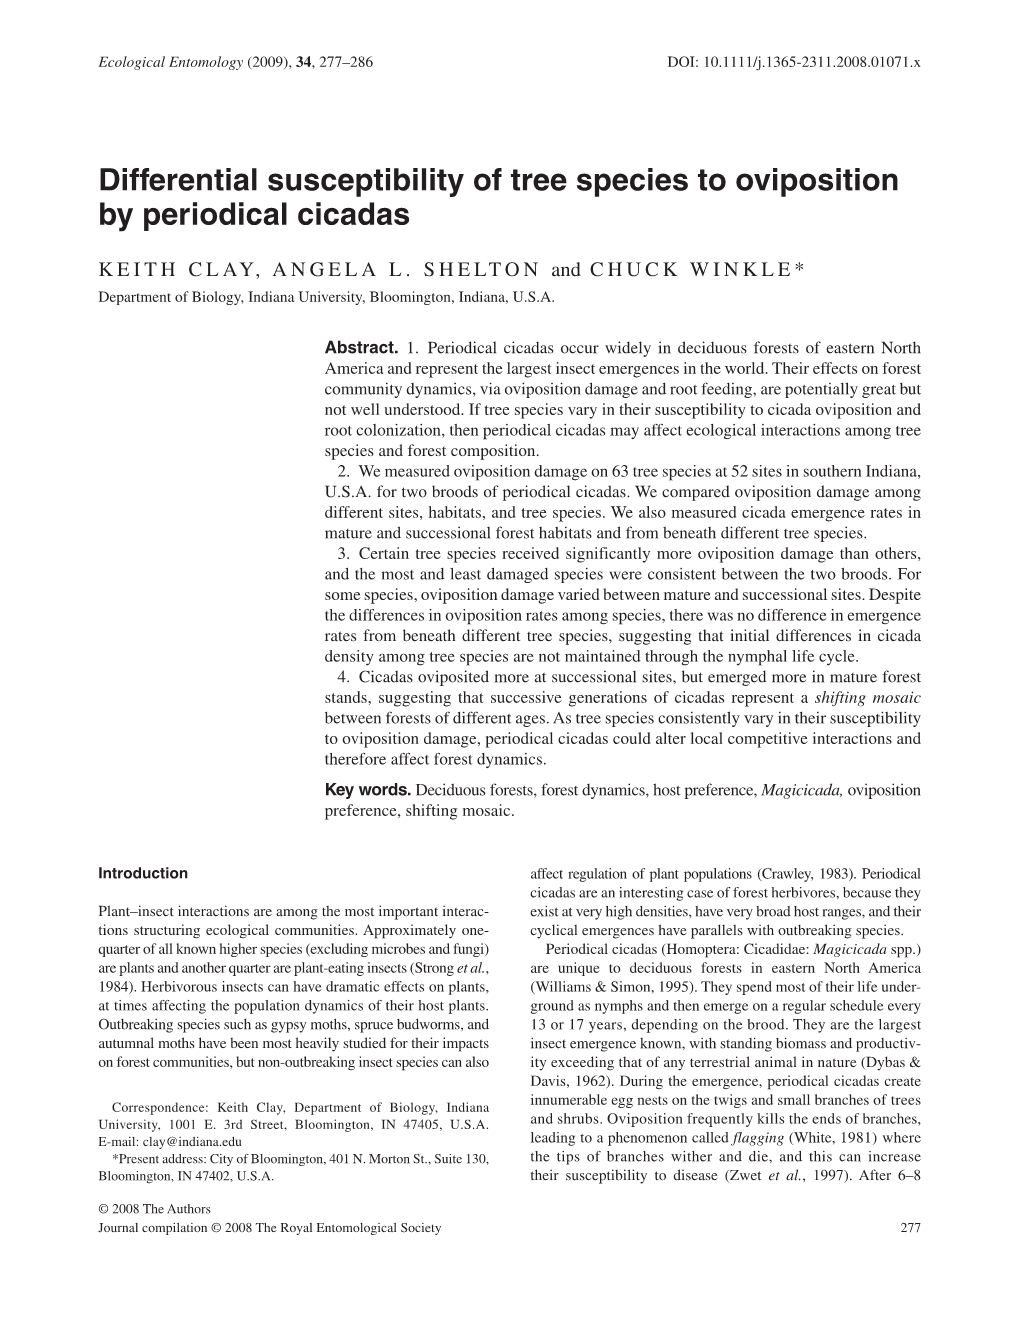 Differential Susceptibility of Tree Species to Oviposition by Periodical Cicadas